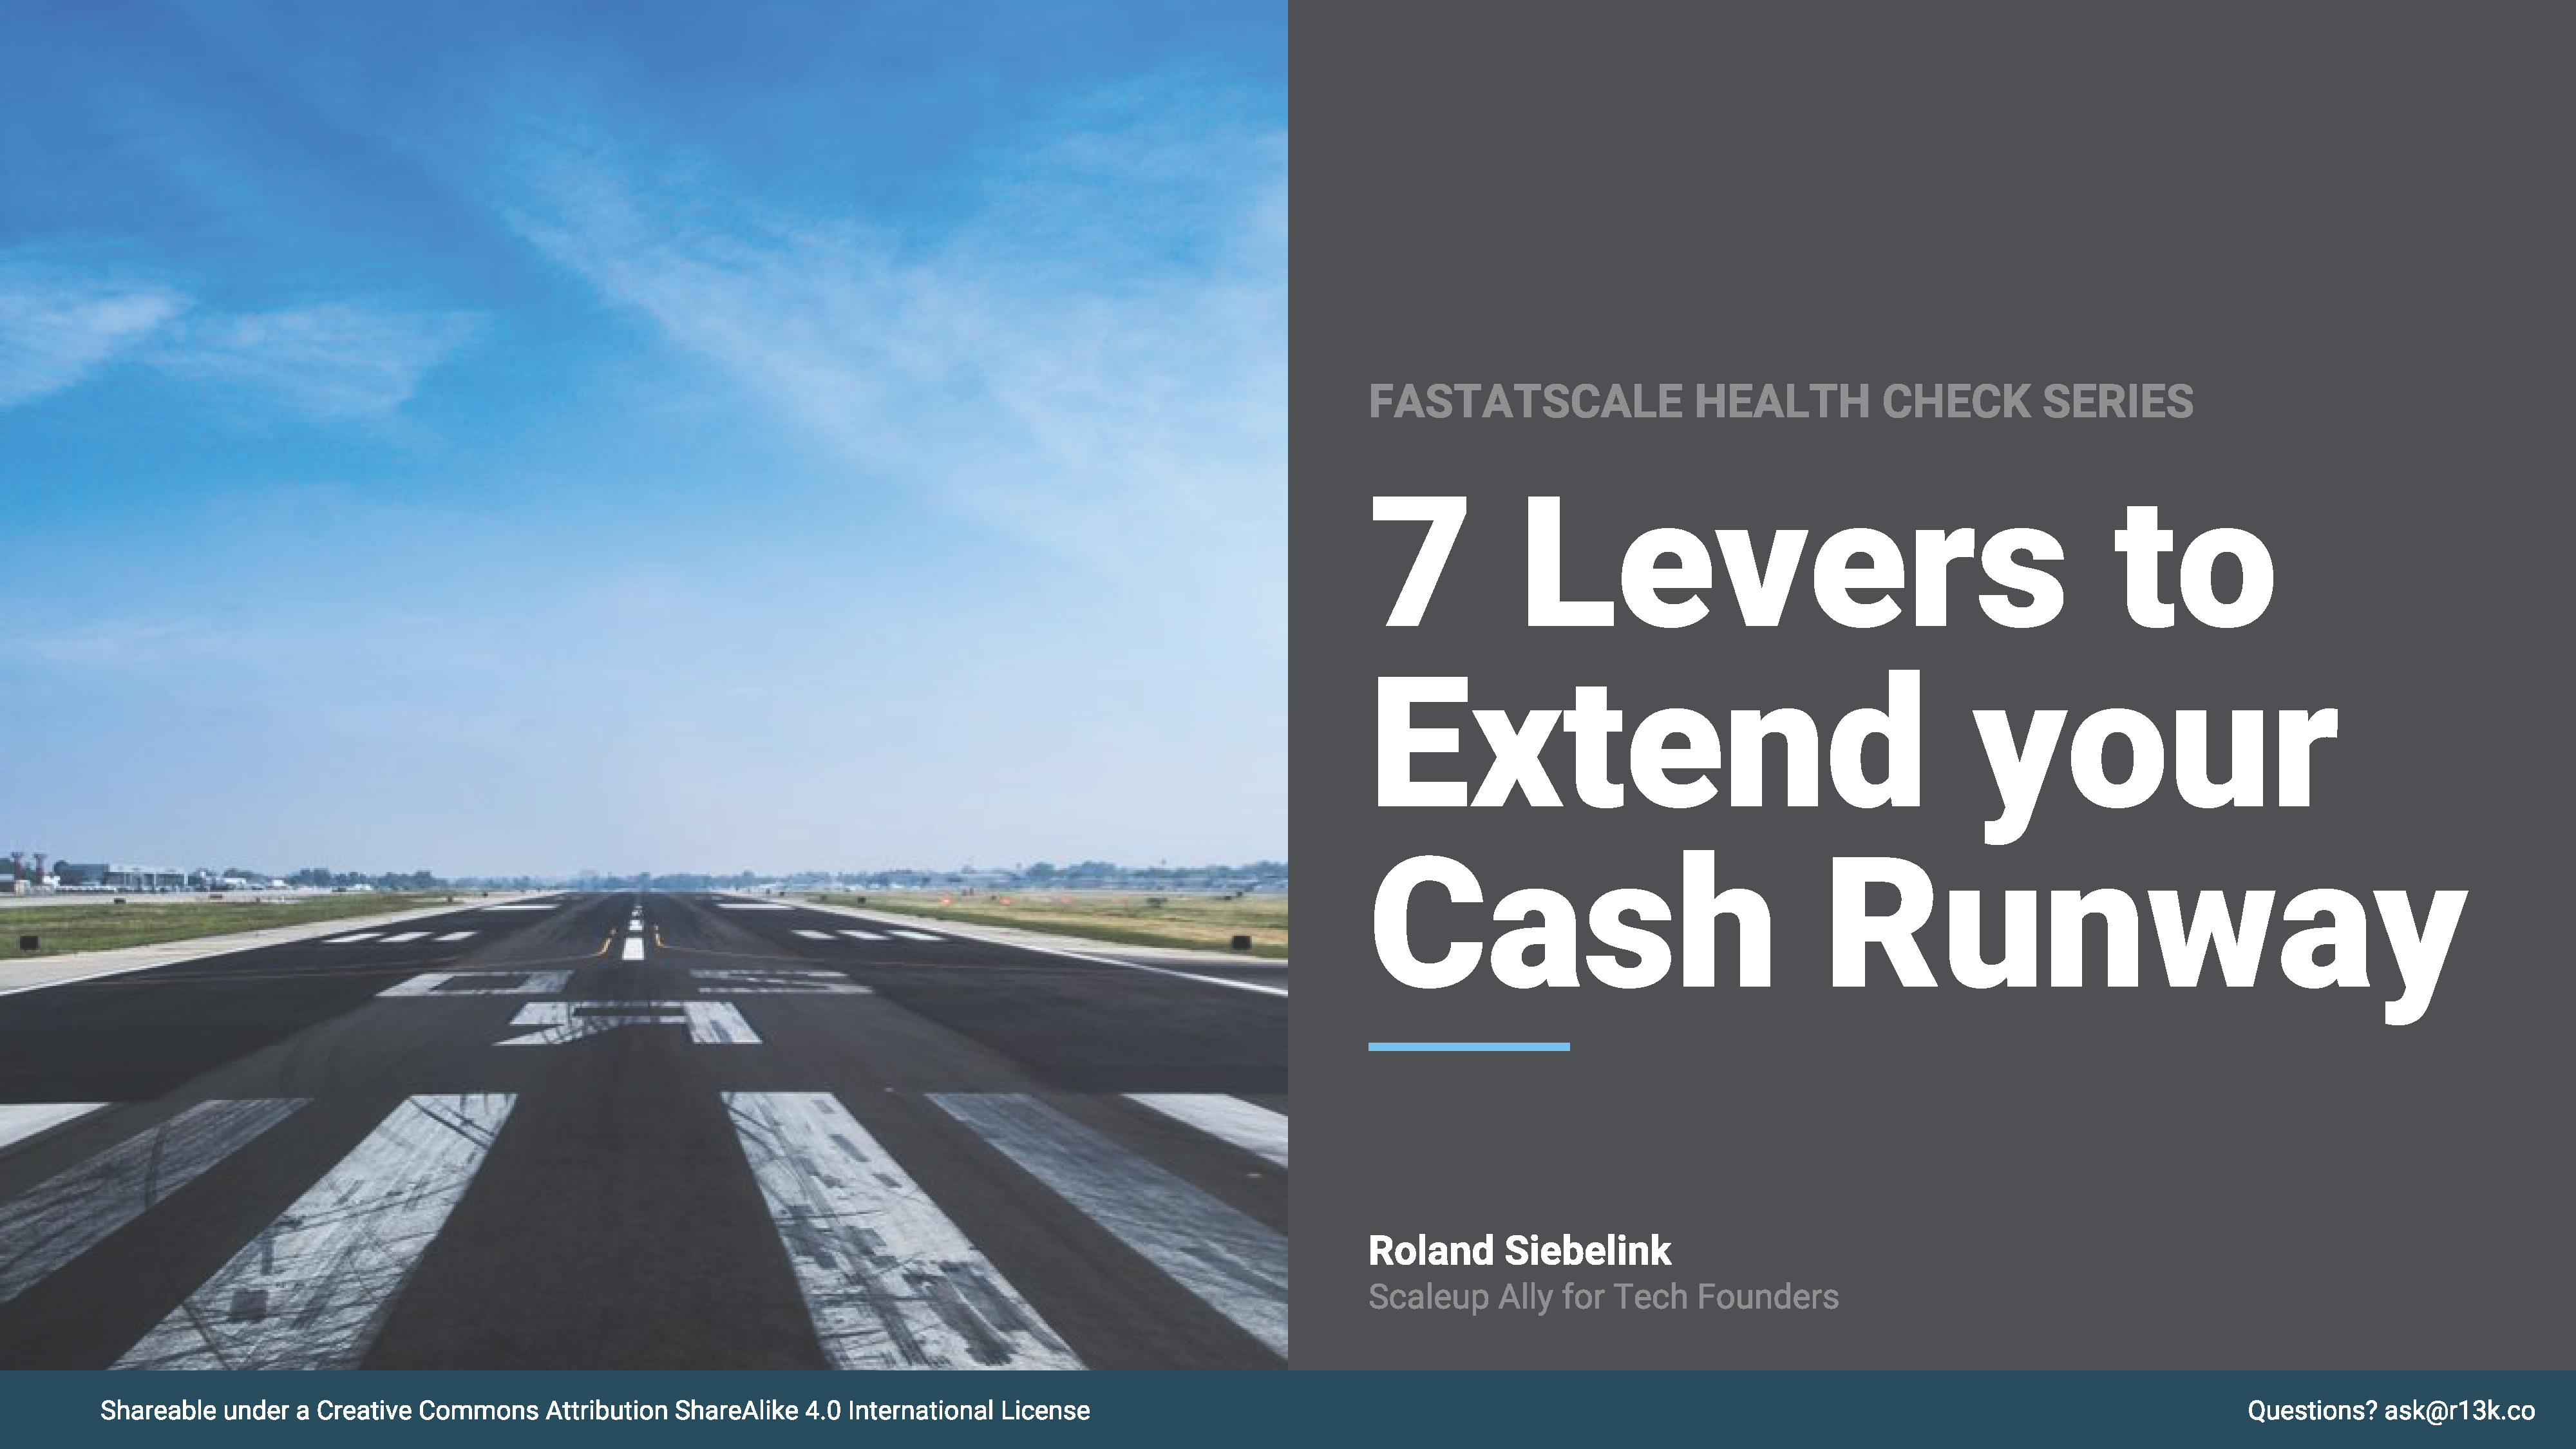 7 Levers to Extend your Cash Runway 